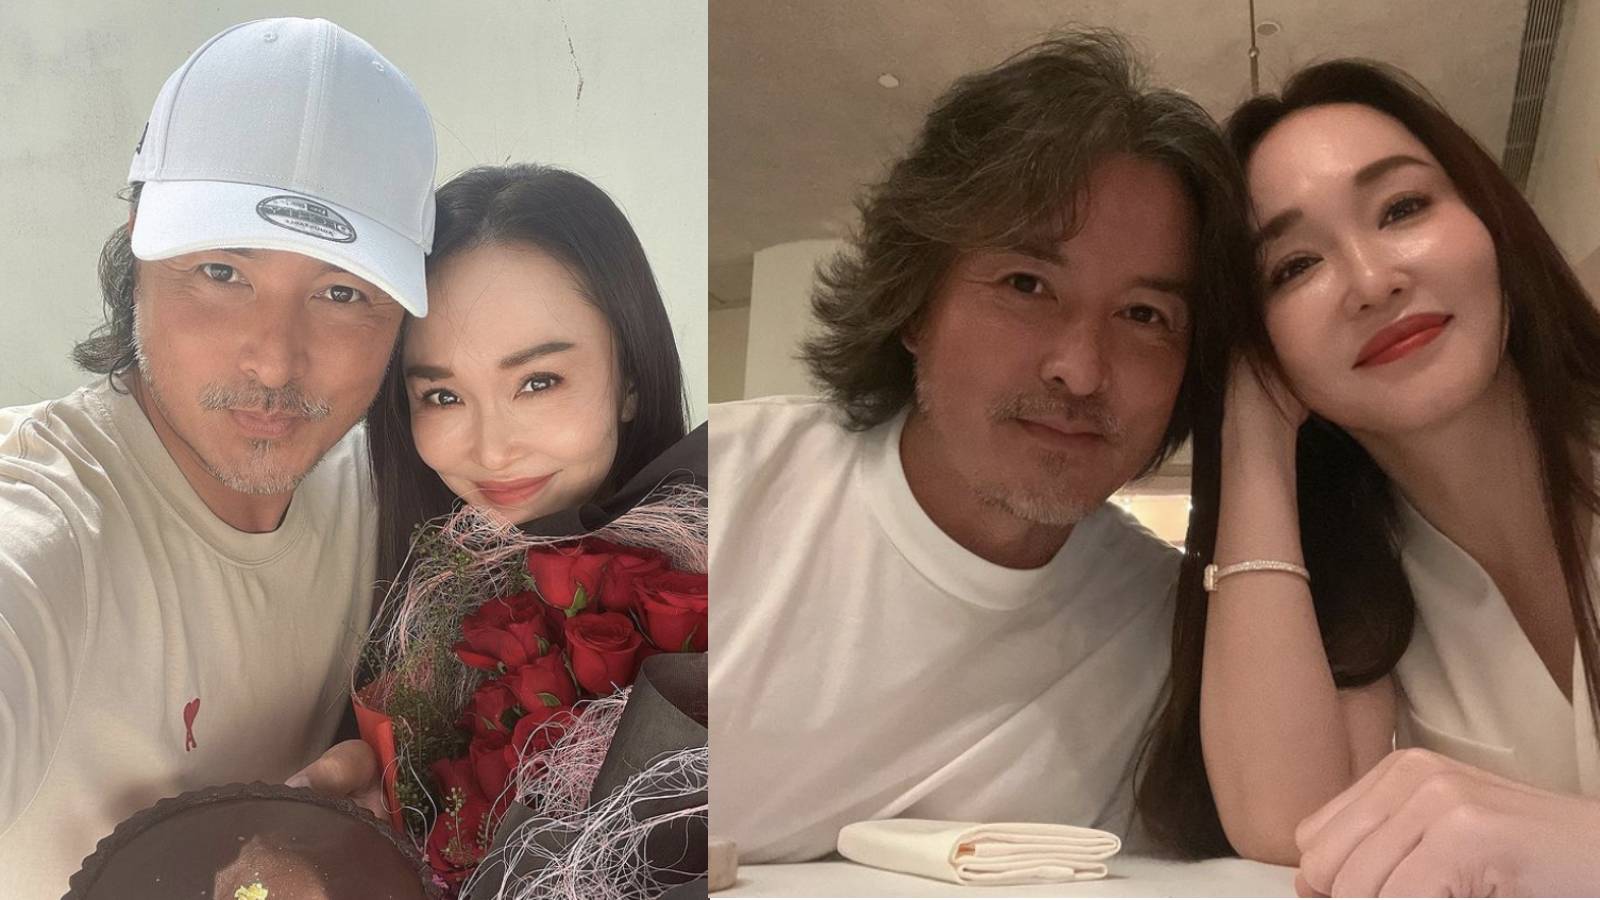 Christopher Lee Says There’s “No Need" To Keep Track Of How Many Years He’s Been With Fann Wong 'Cos They’ll Be Together “Forever”